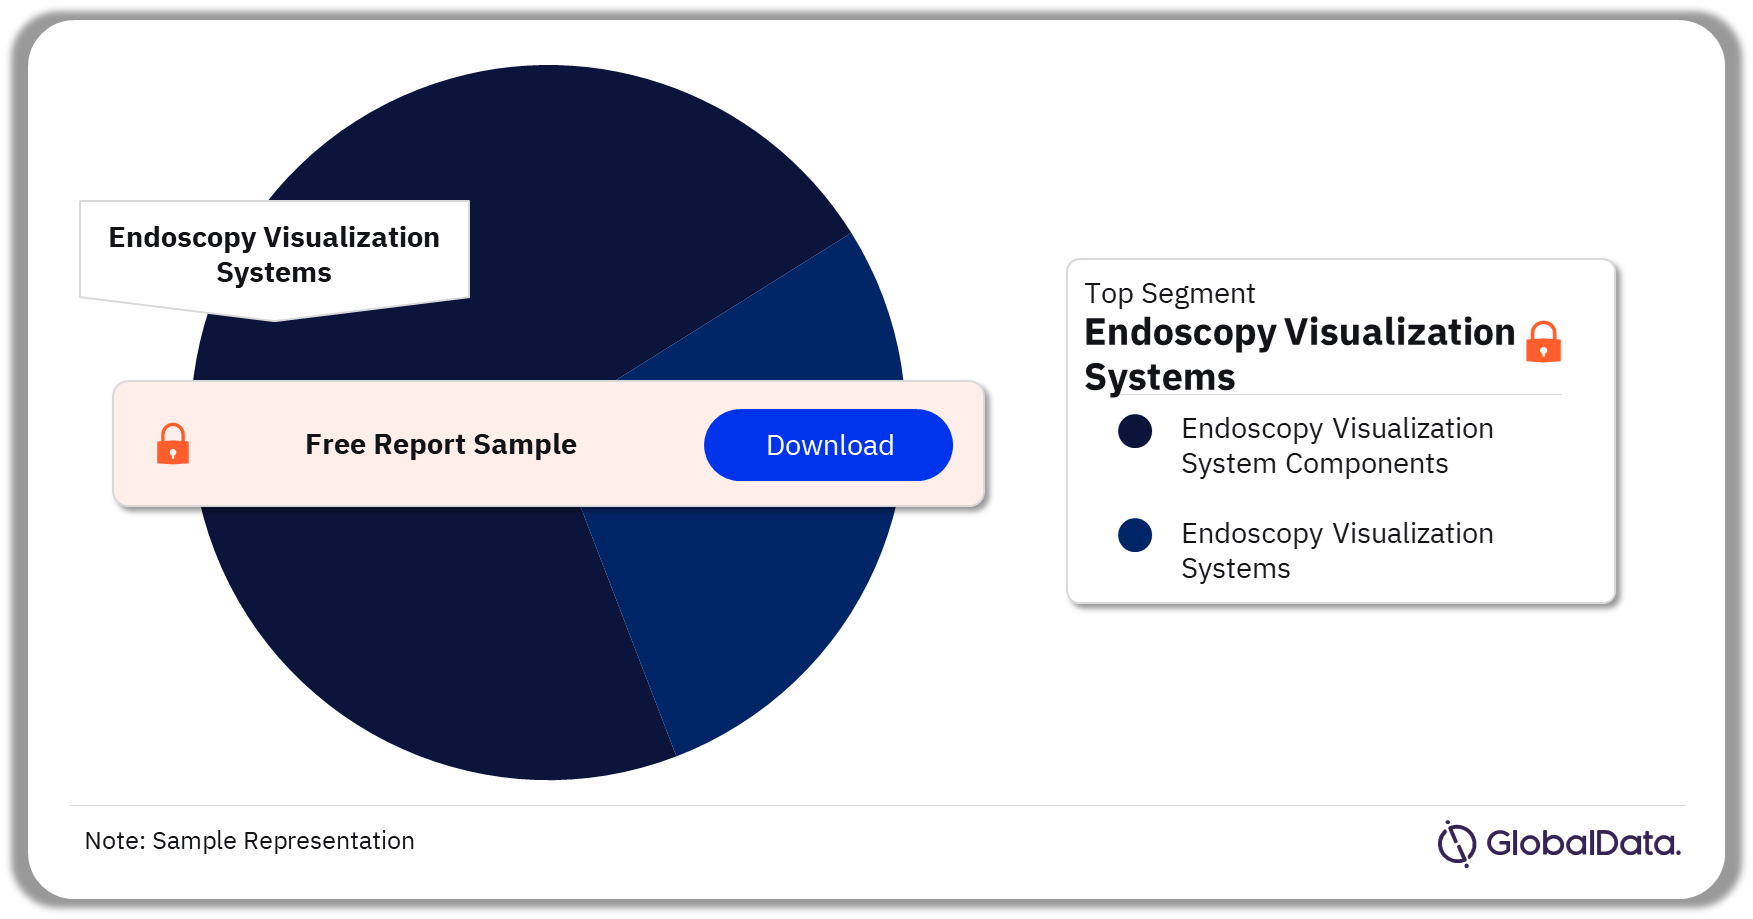 Endoscopy Visualization Systems and Components Market Analysis by Segments, 2023 (%)